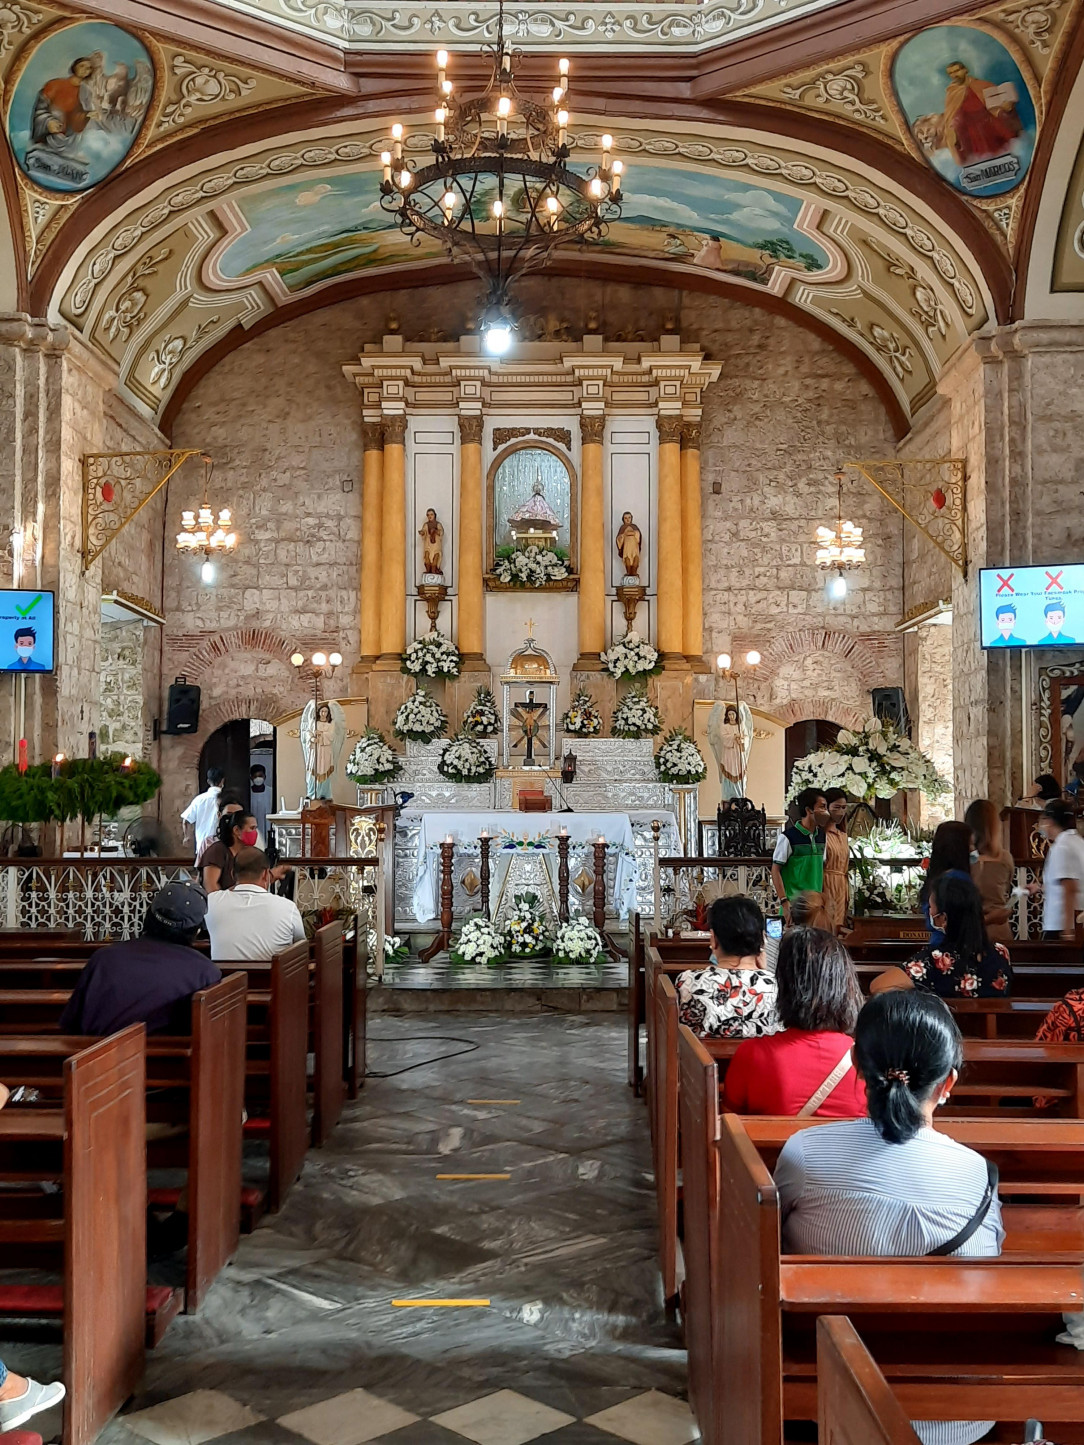 Interior of the Archdiocesan Shrine of Our Lady of Caysasay in Labac, Taal, Batangas, Philippines